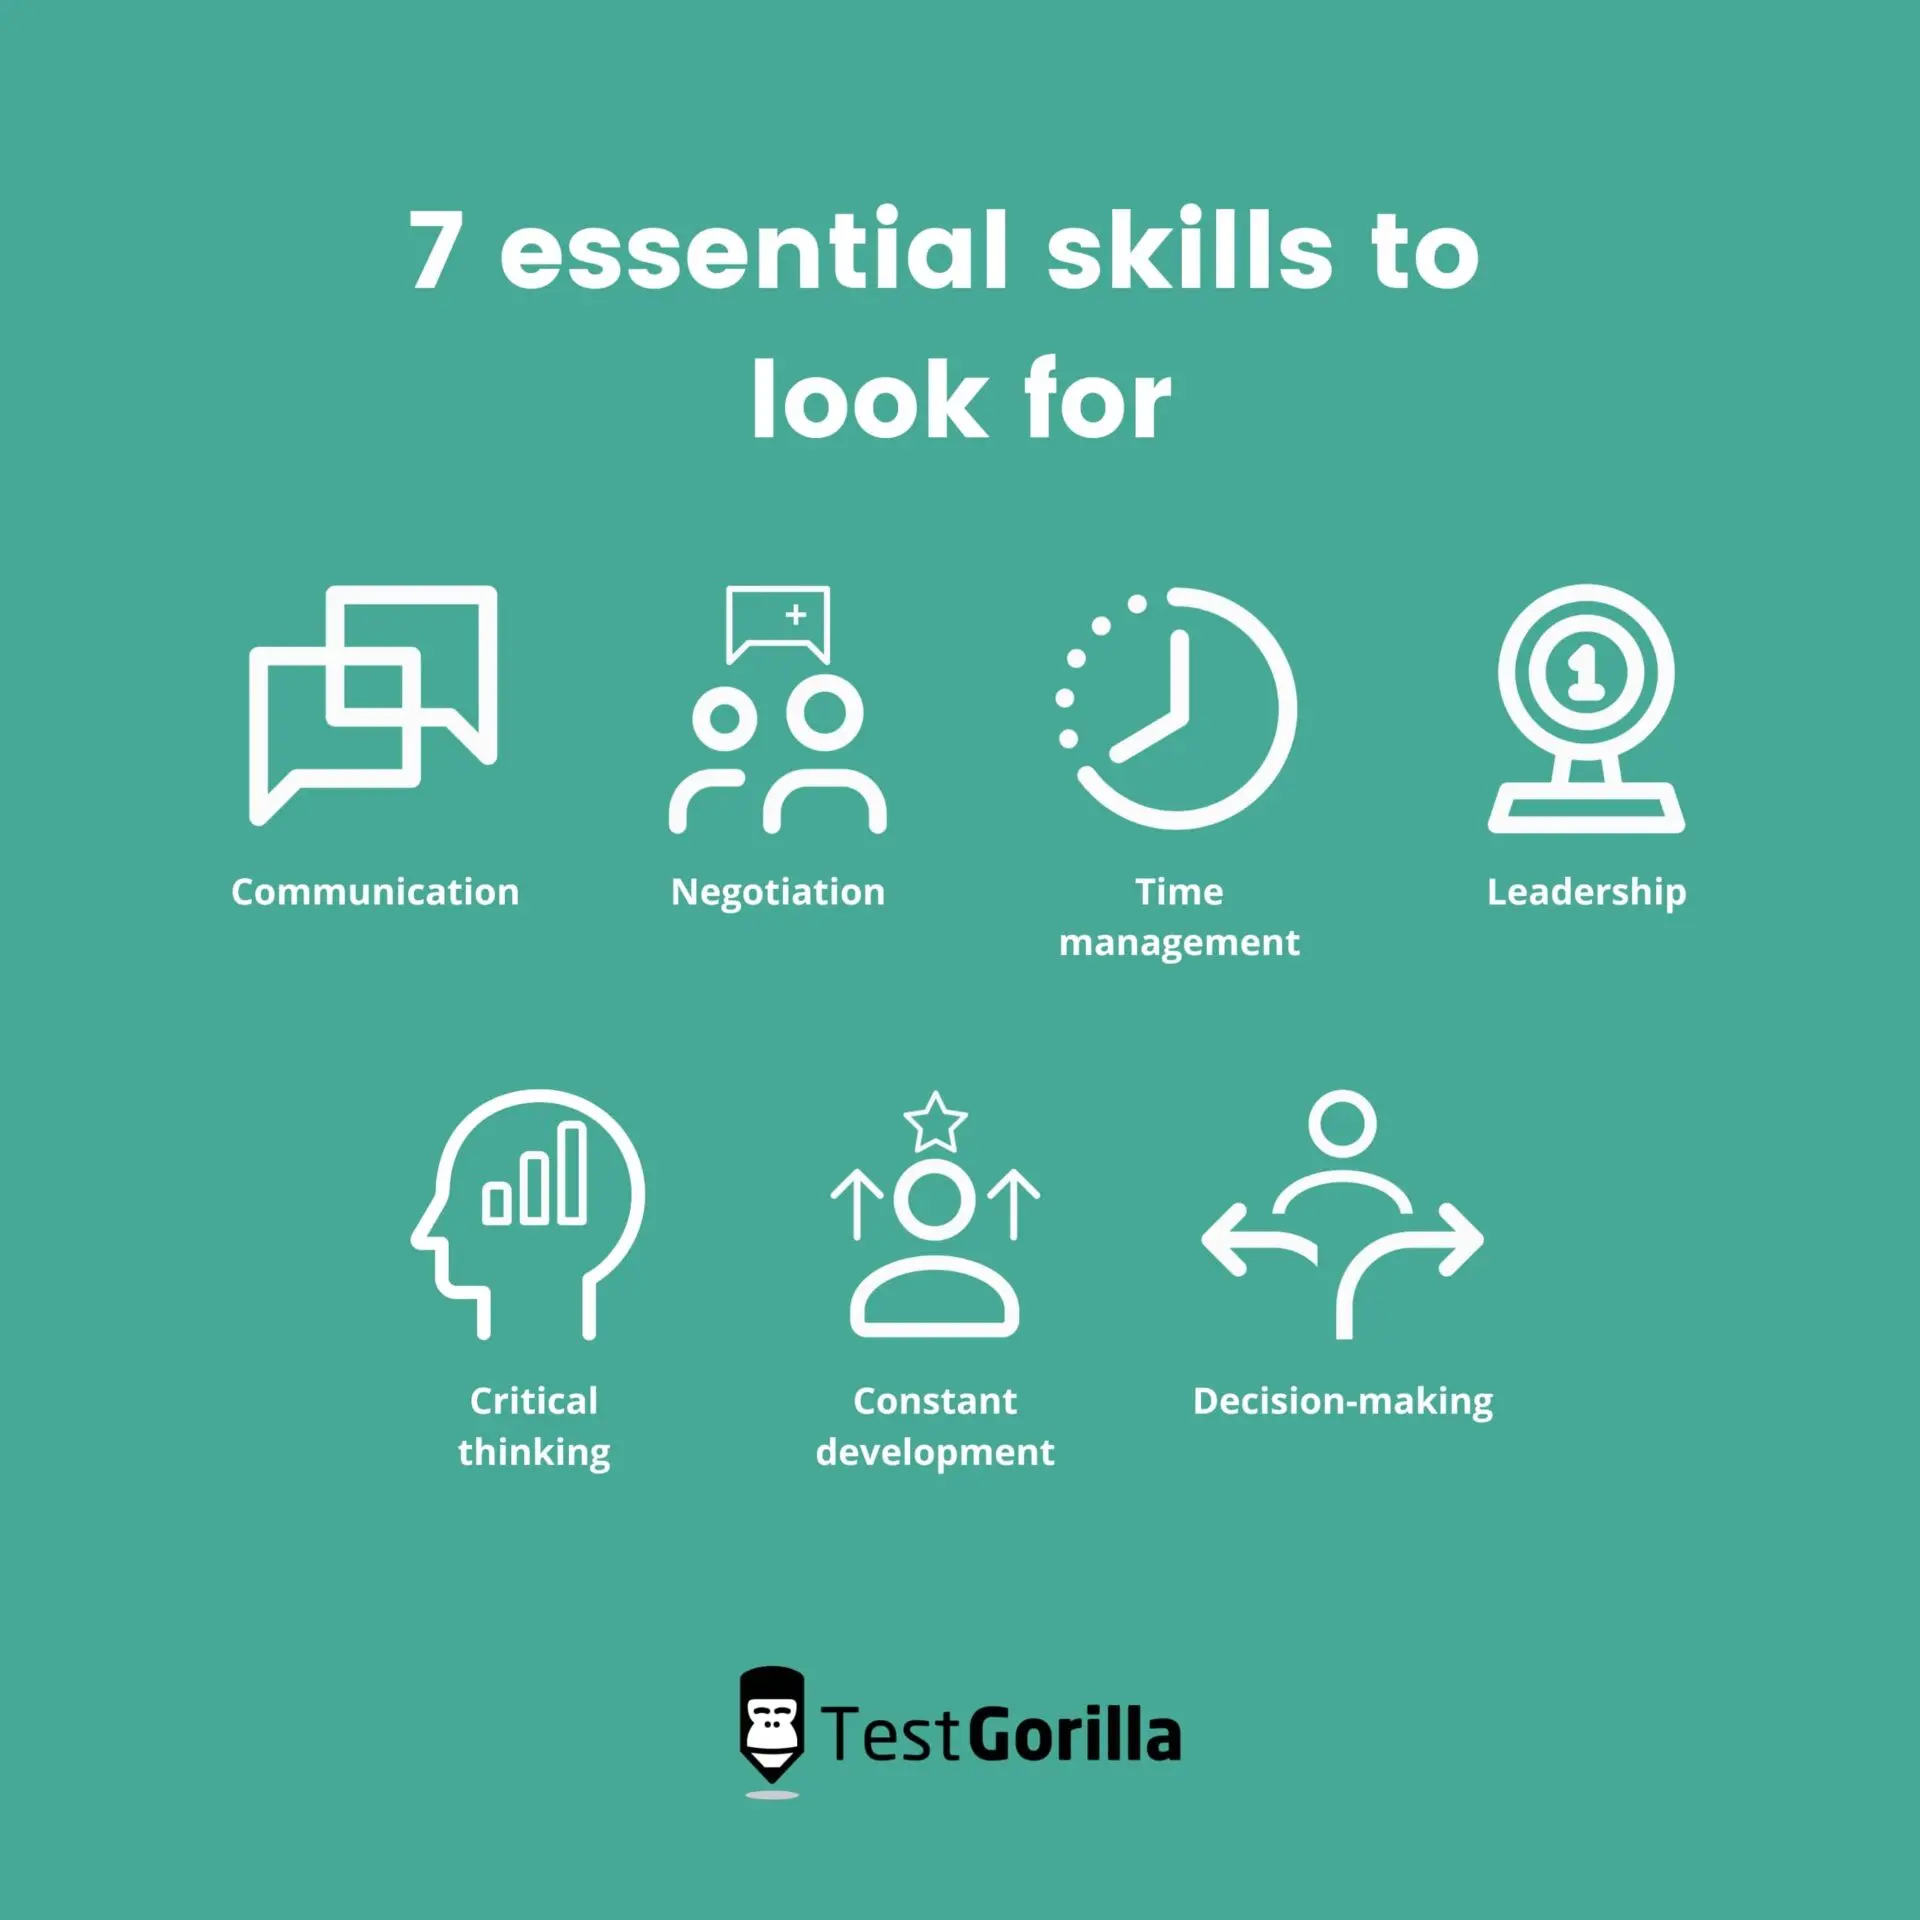 7 essential skills to look for